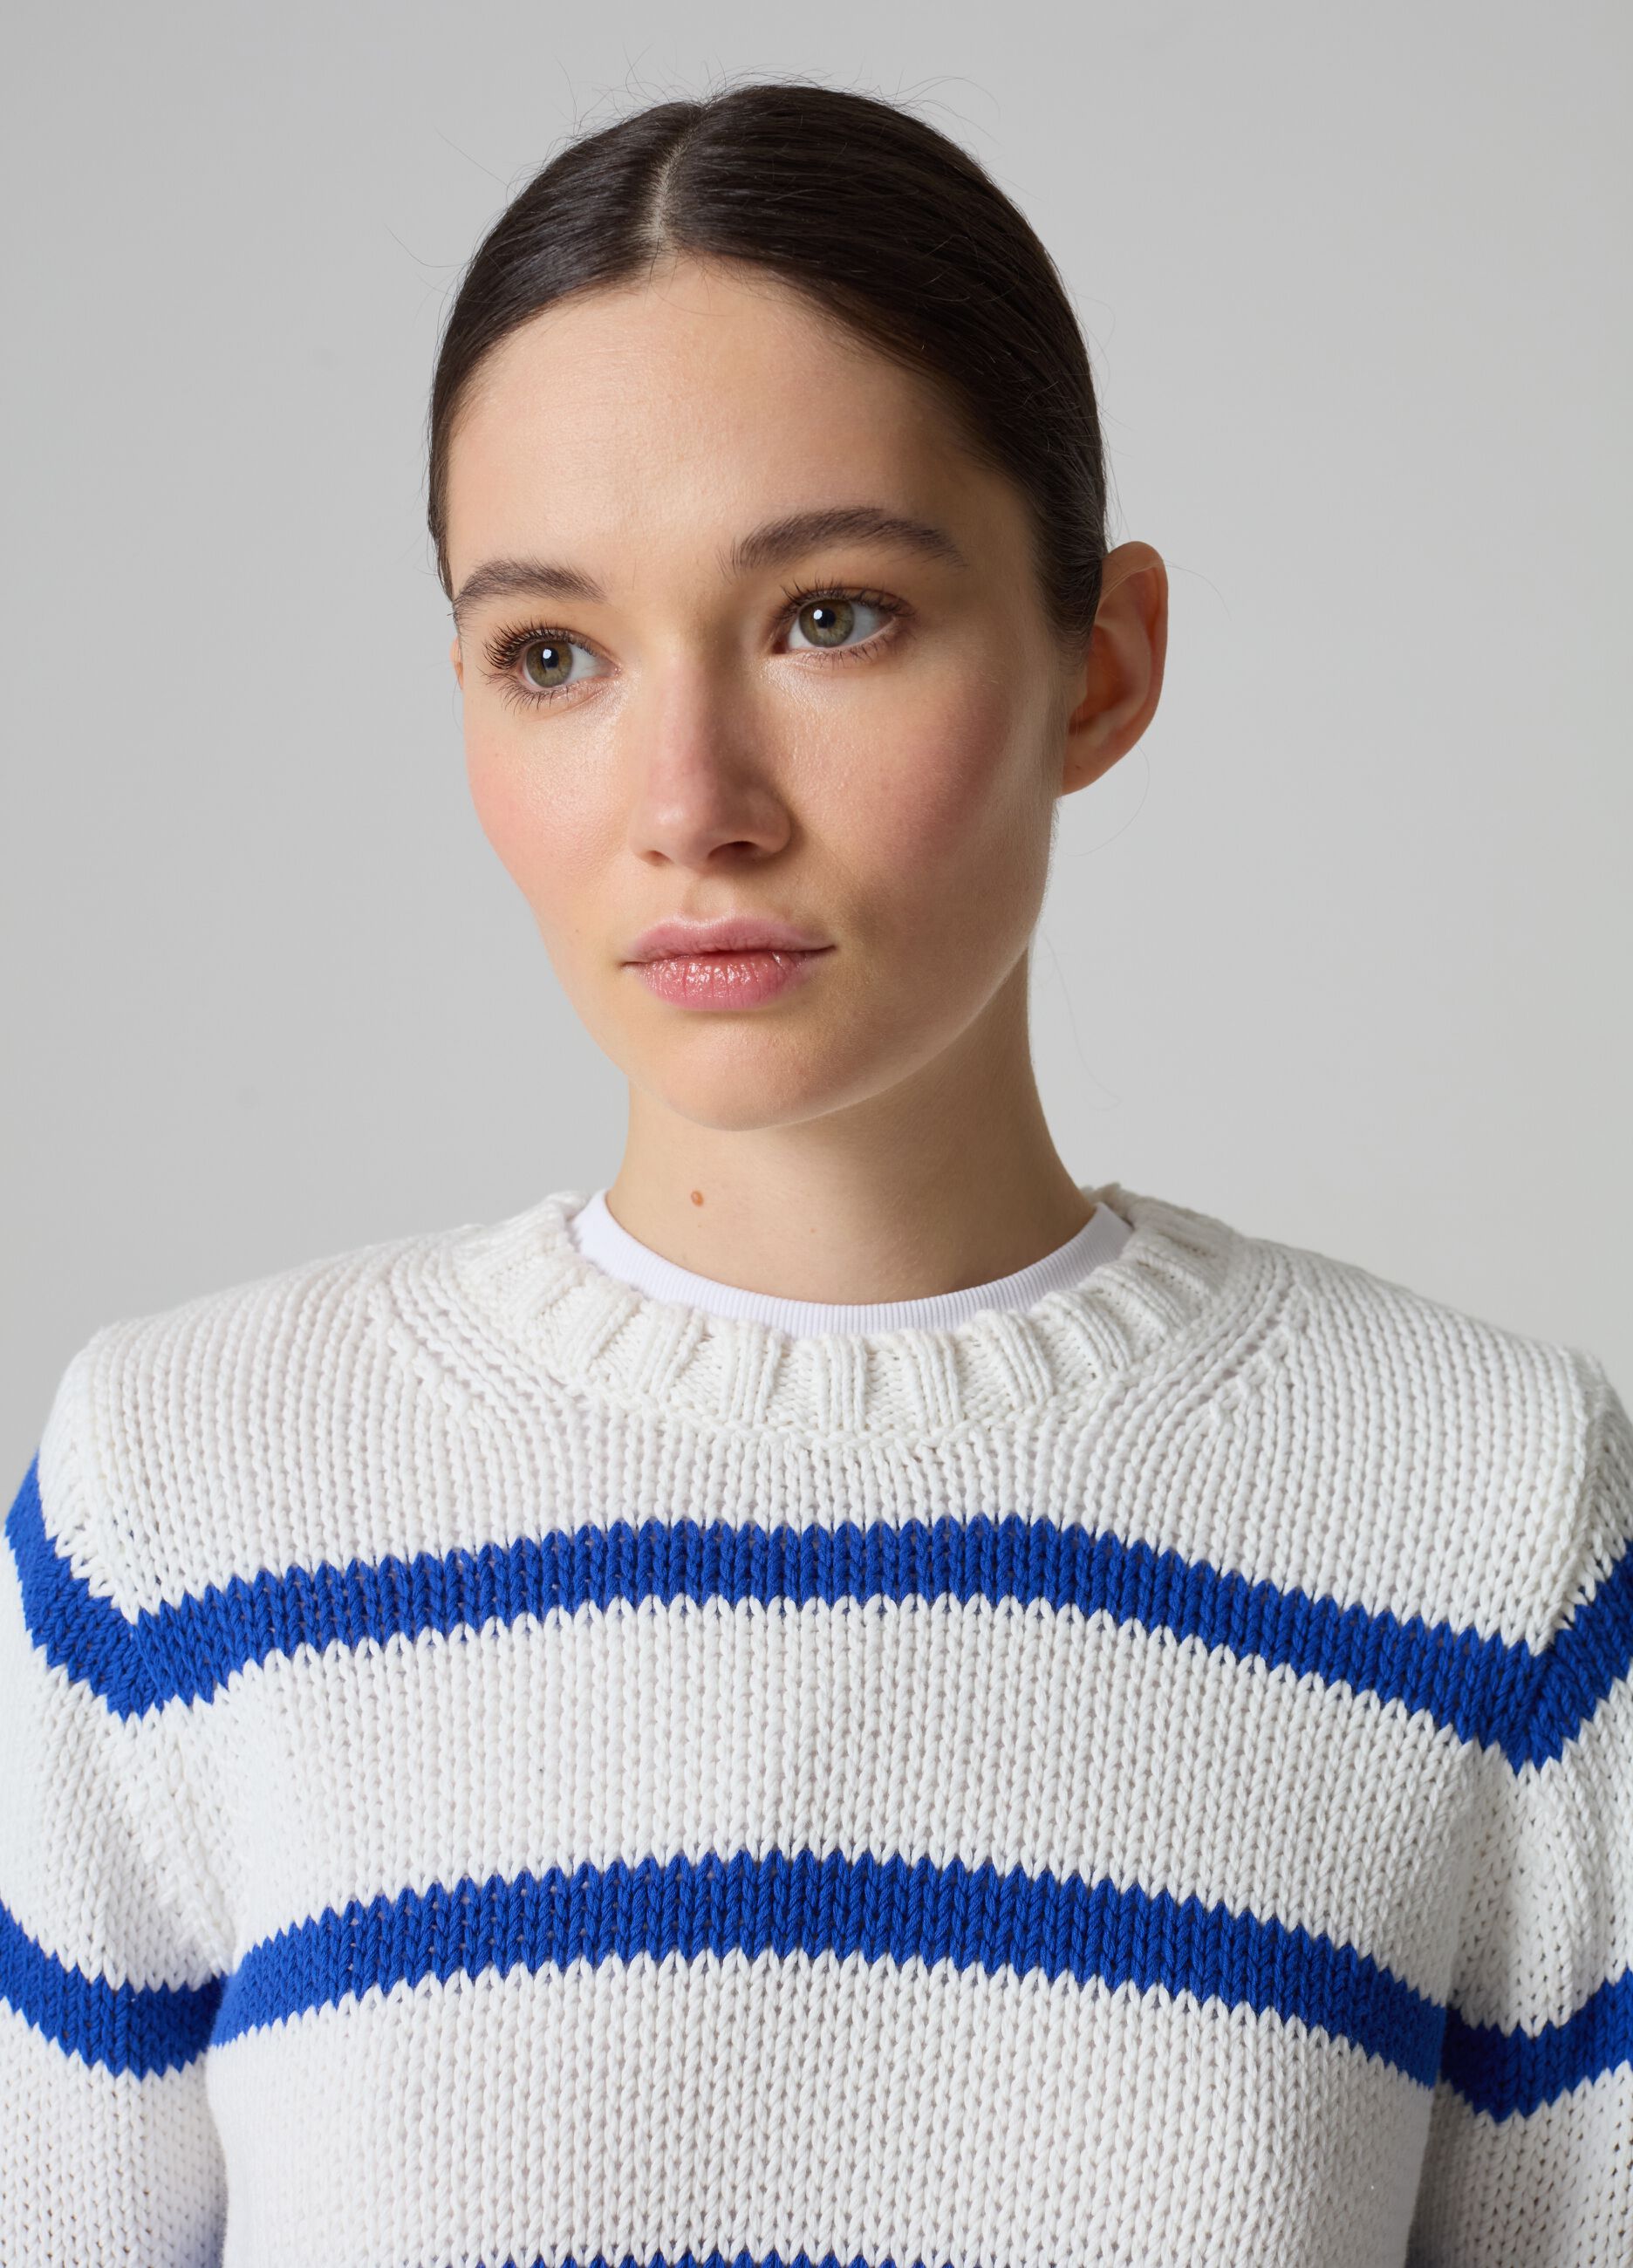 Cropped pullover in striped cotton